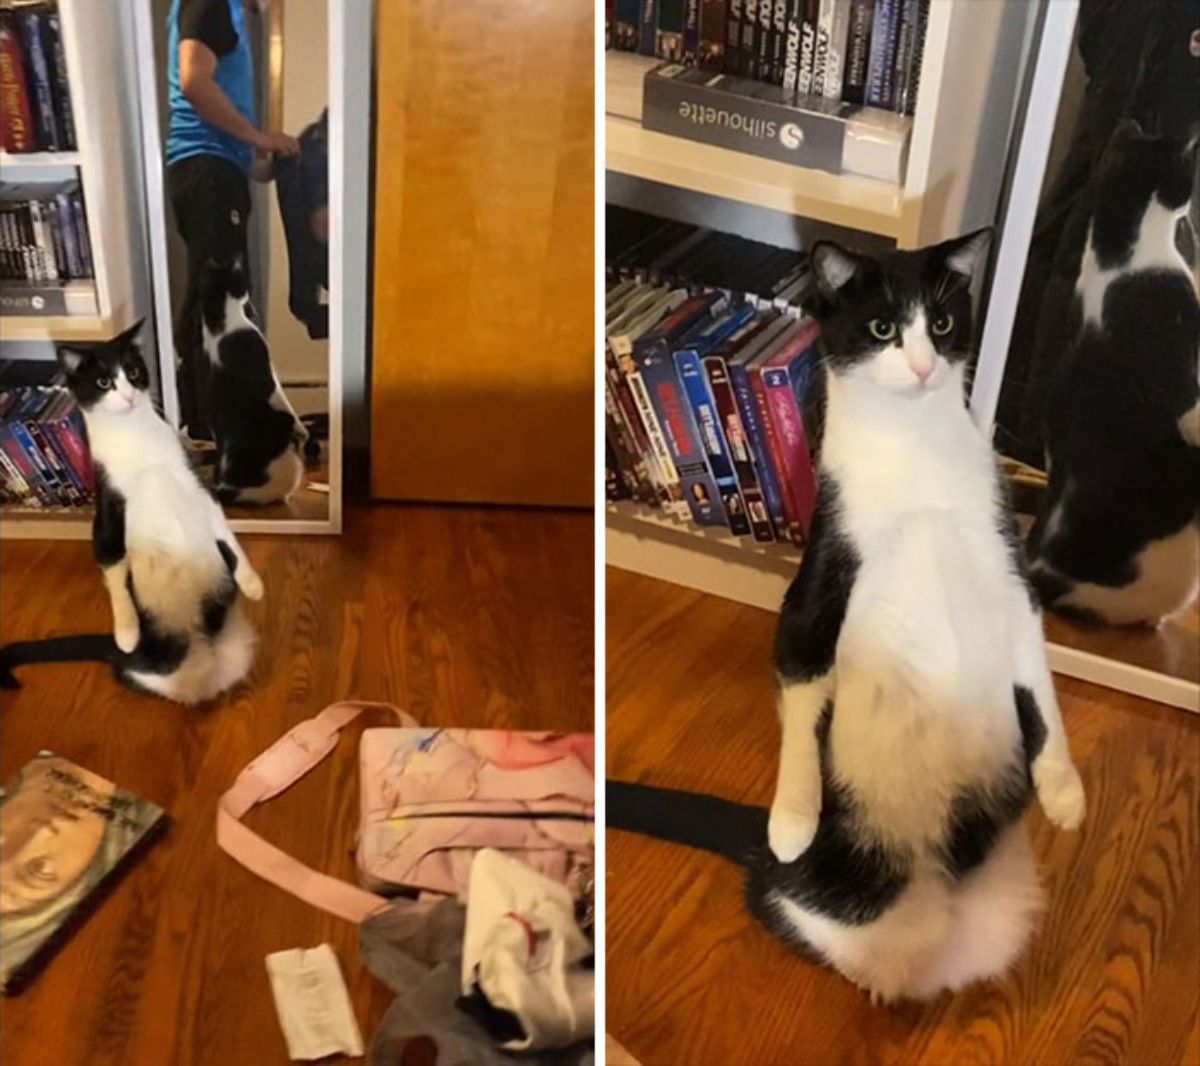 2 photos of a black and white cat sitting up on its haunches